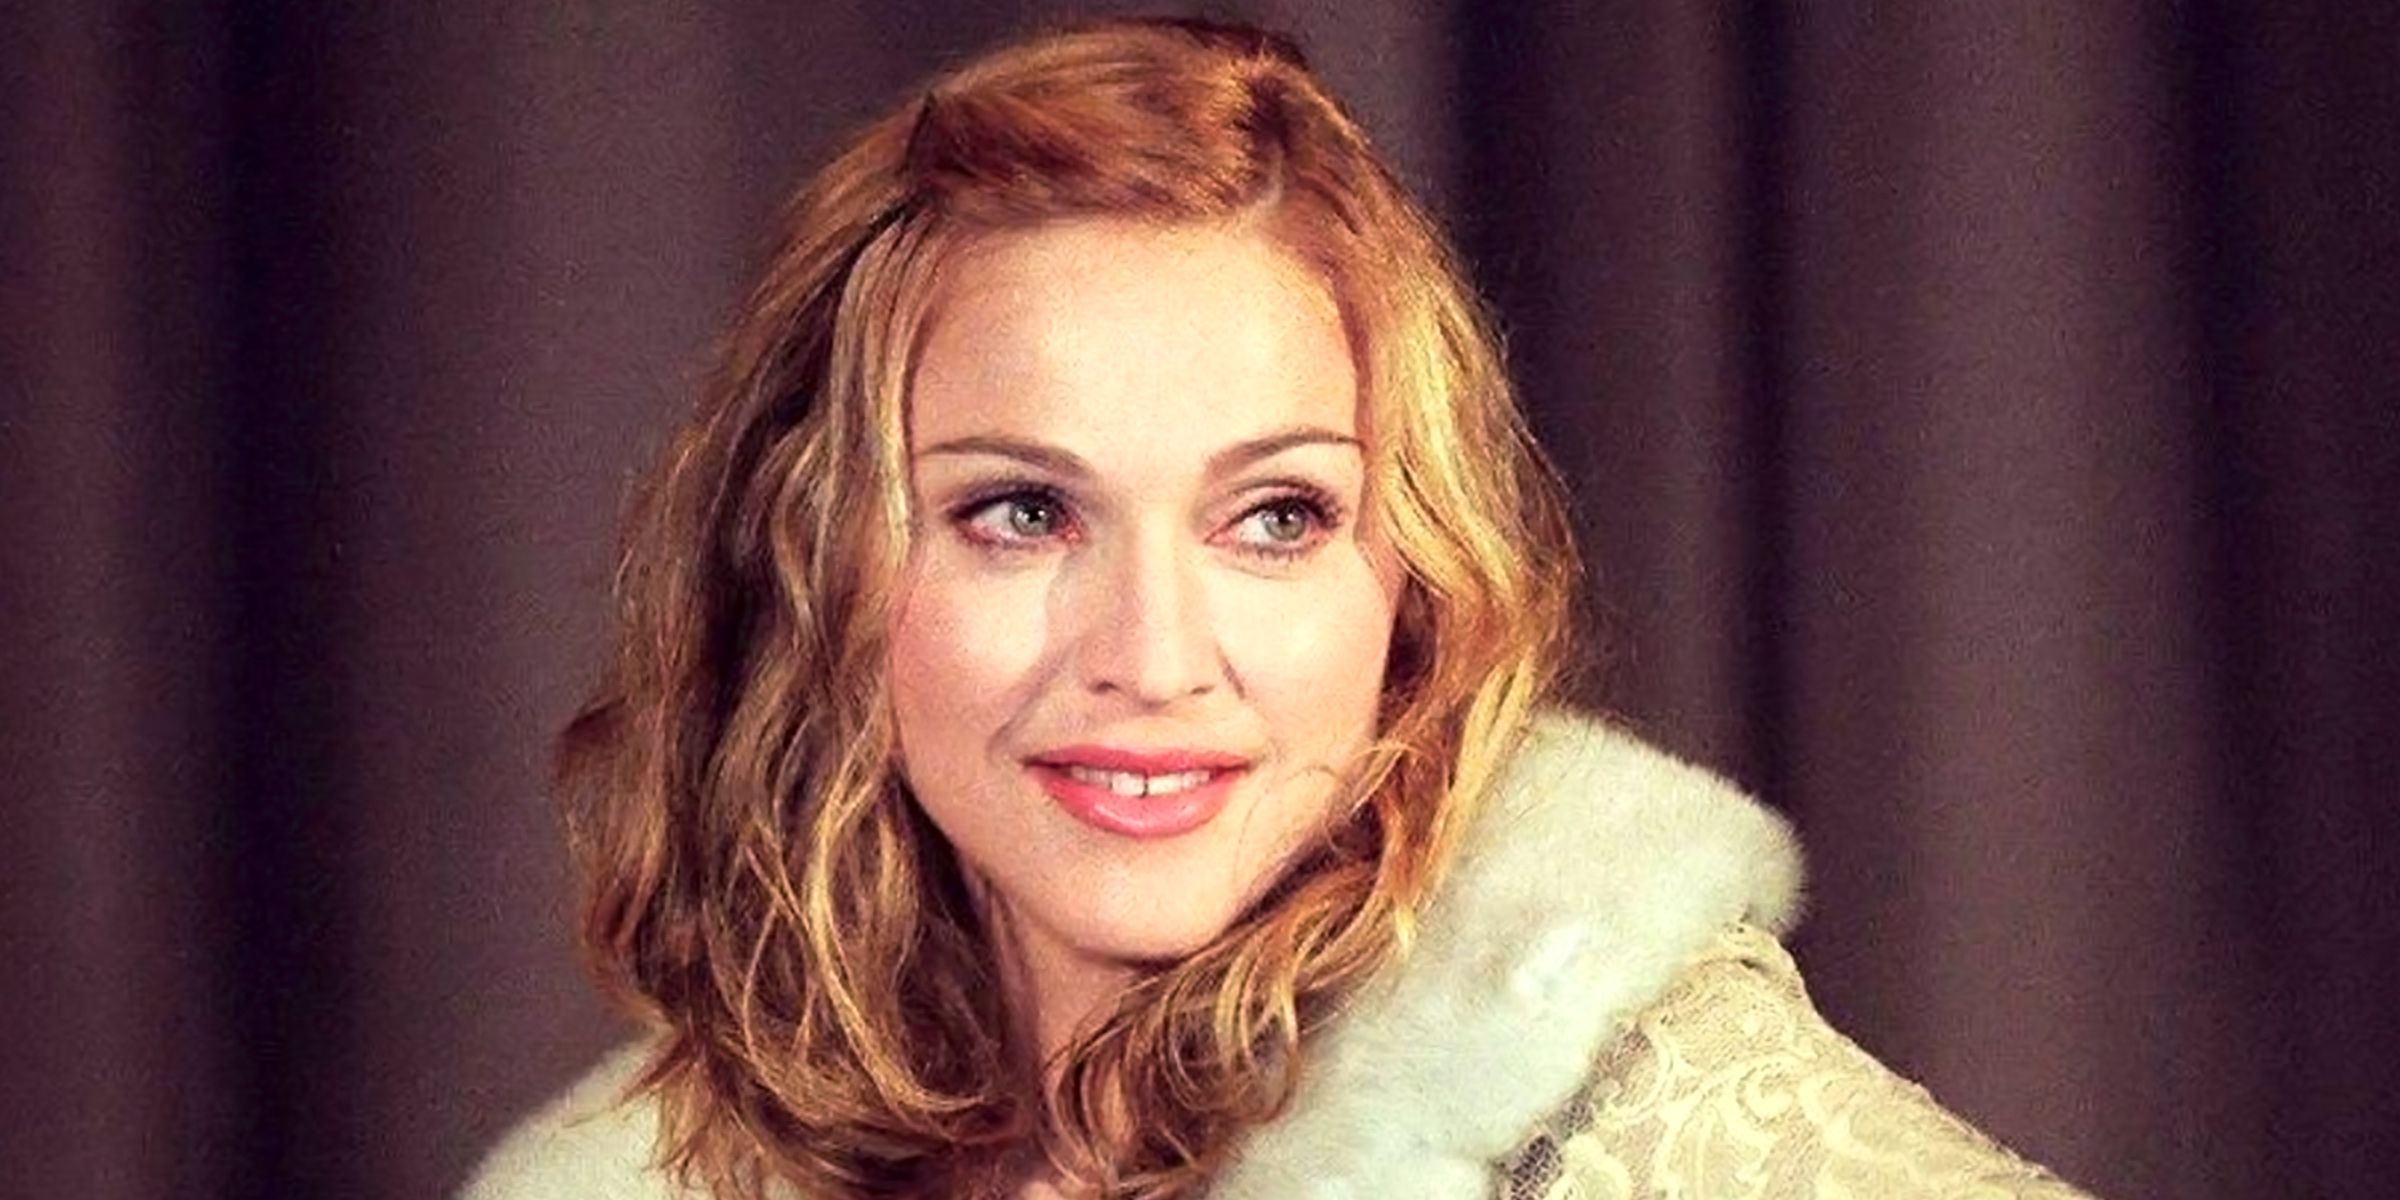 'Jesus What Happened to Her?': Madonna's Fans Worried as She Looks 'Unrecognizable' in New Pics